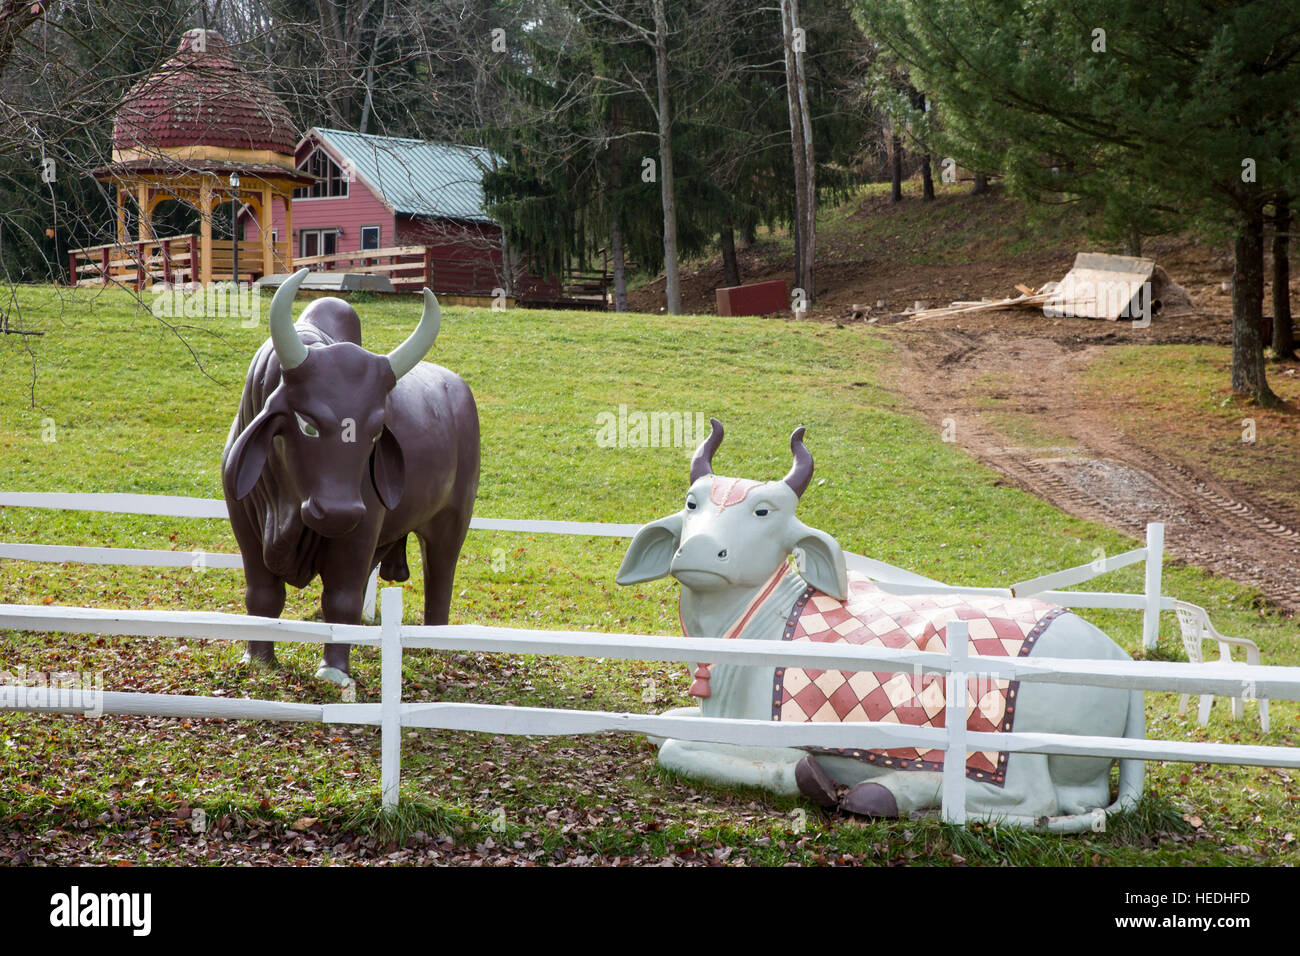 New Vrindaban, West Virginia - Statues of sacred cows at New Vrindaban, a spiritual center for the Hare Krishna movement. Stock Photo